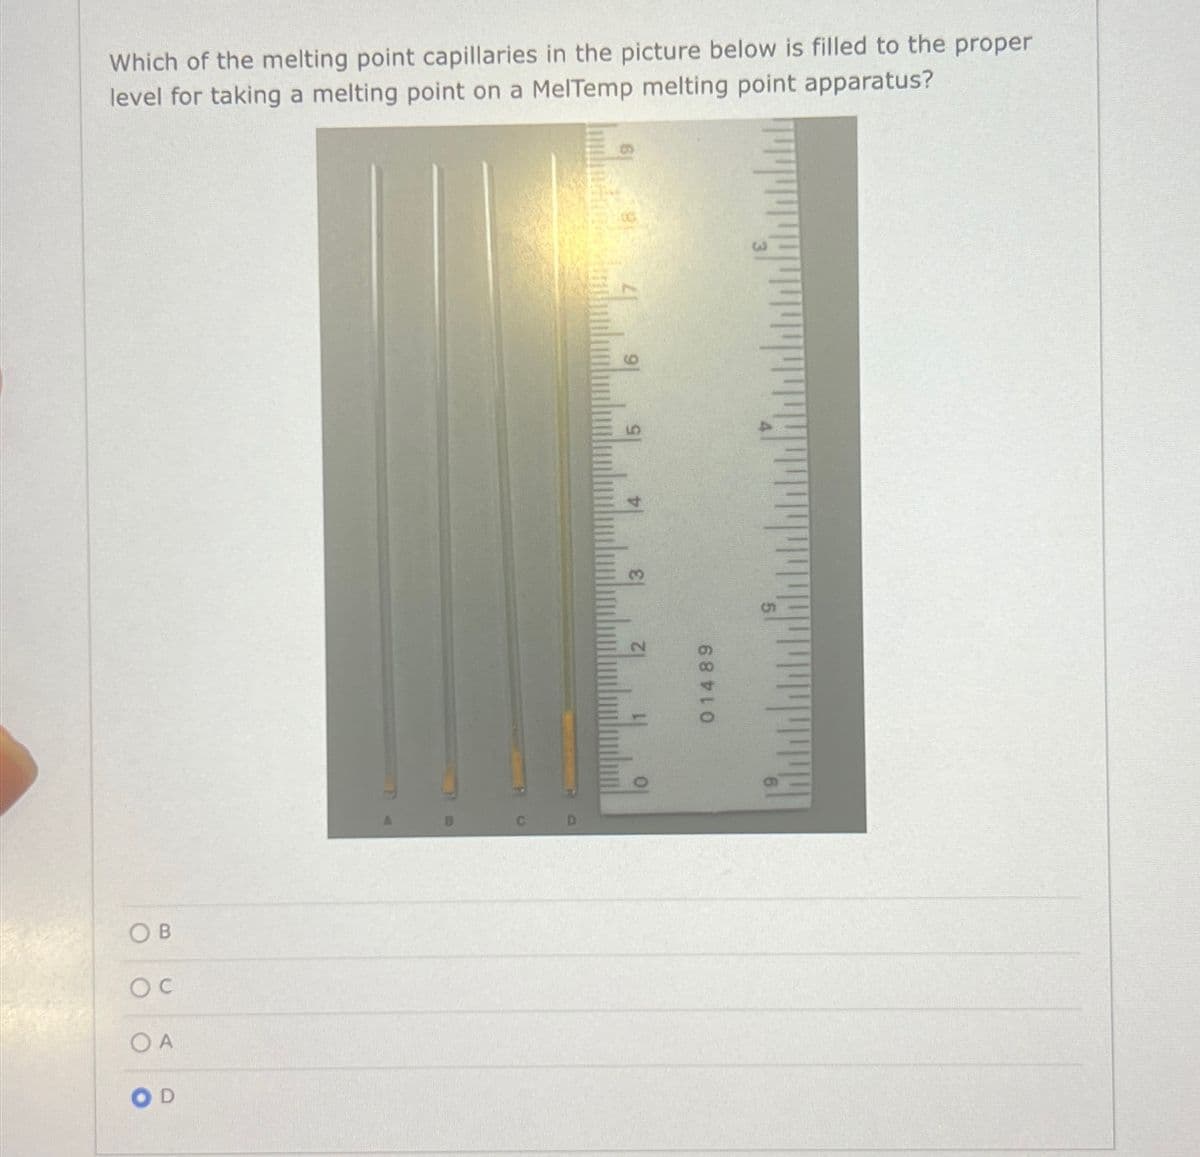 Which of the melting point capillaries in the picture below is filled to the proper
level for taking a melting point on a MelTemp melting point apparatus?
OB
OC
OA
12
01489
5